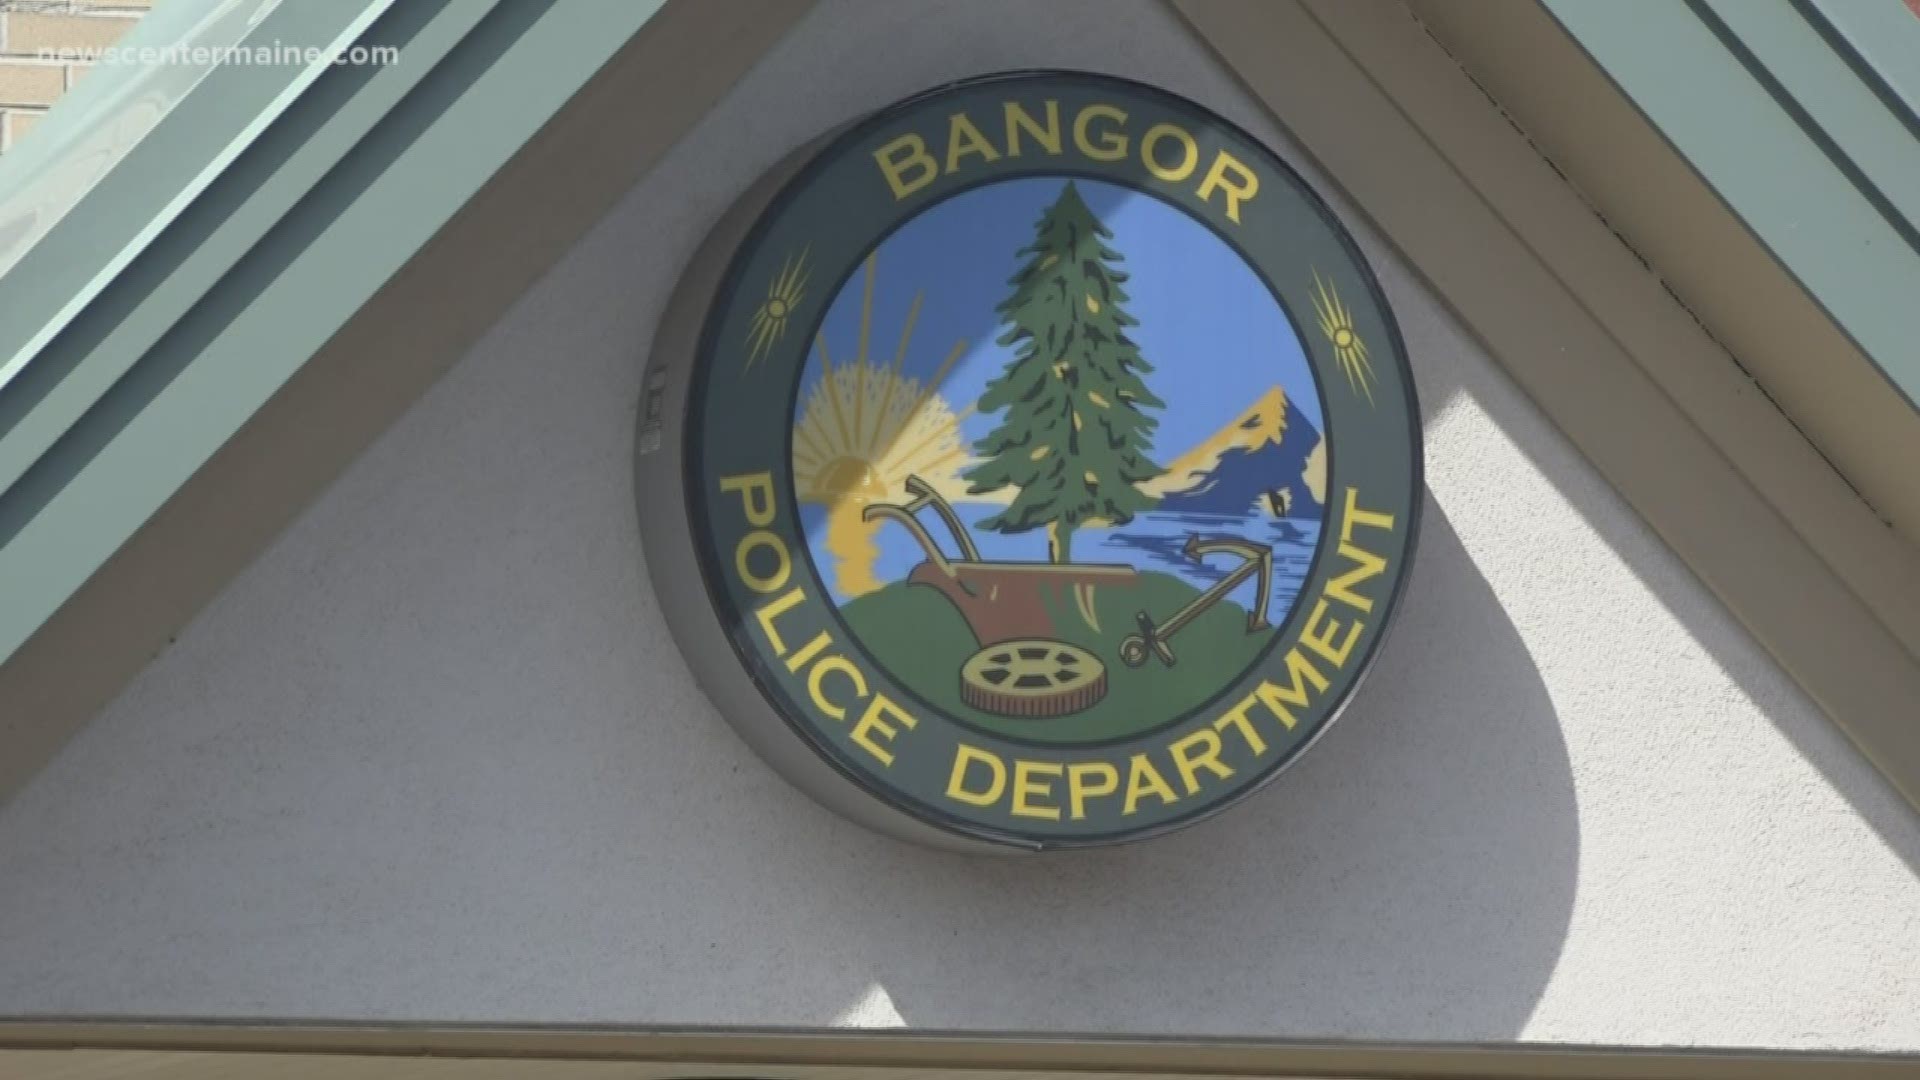 The Bangor Police Department is proposing a fee system for non-emergency calls. They say they've been getting more calls for help from group homes and shelter and they are not all emergencies. They have their hands full and responding to non-emergency calls takes up valuable time.